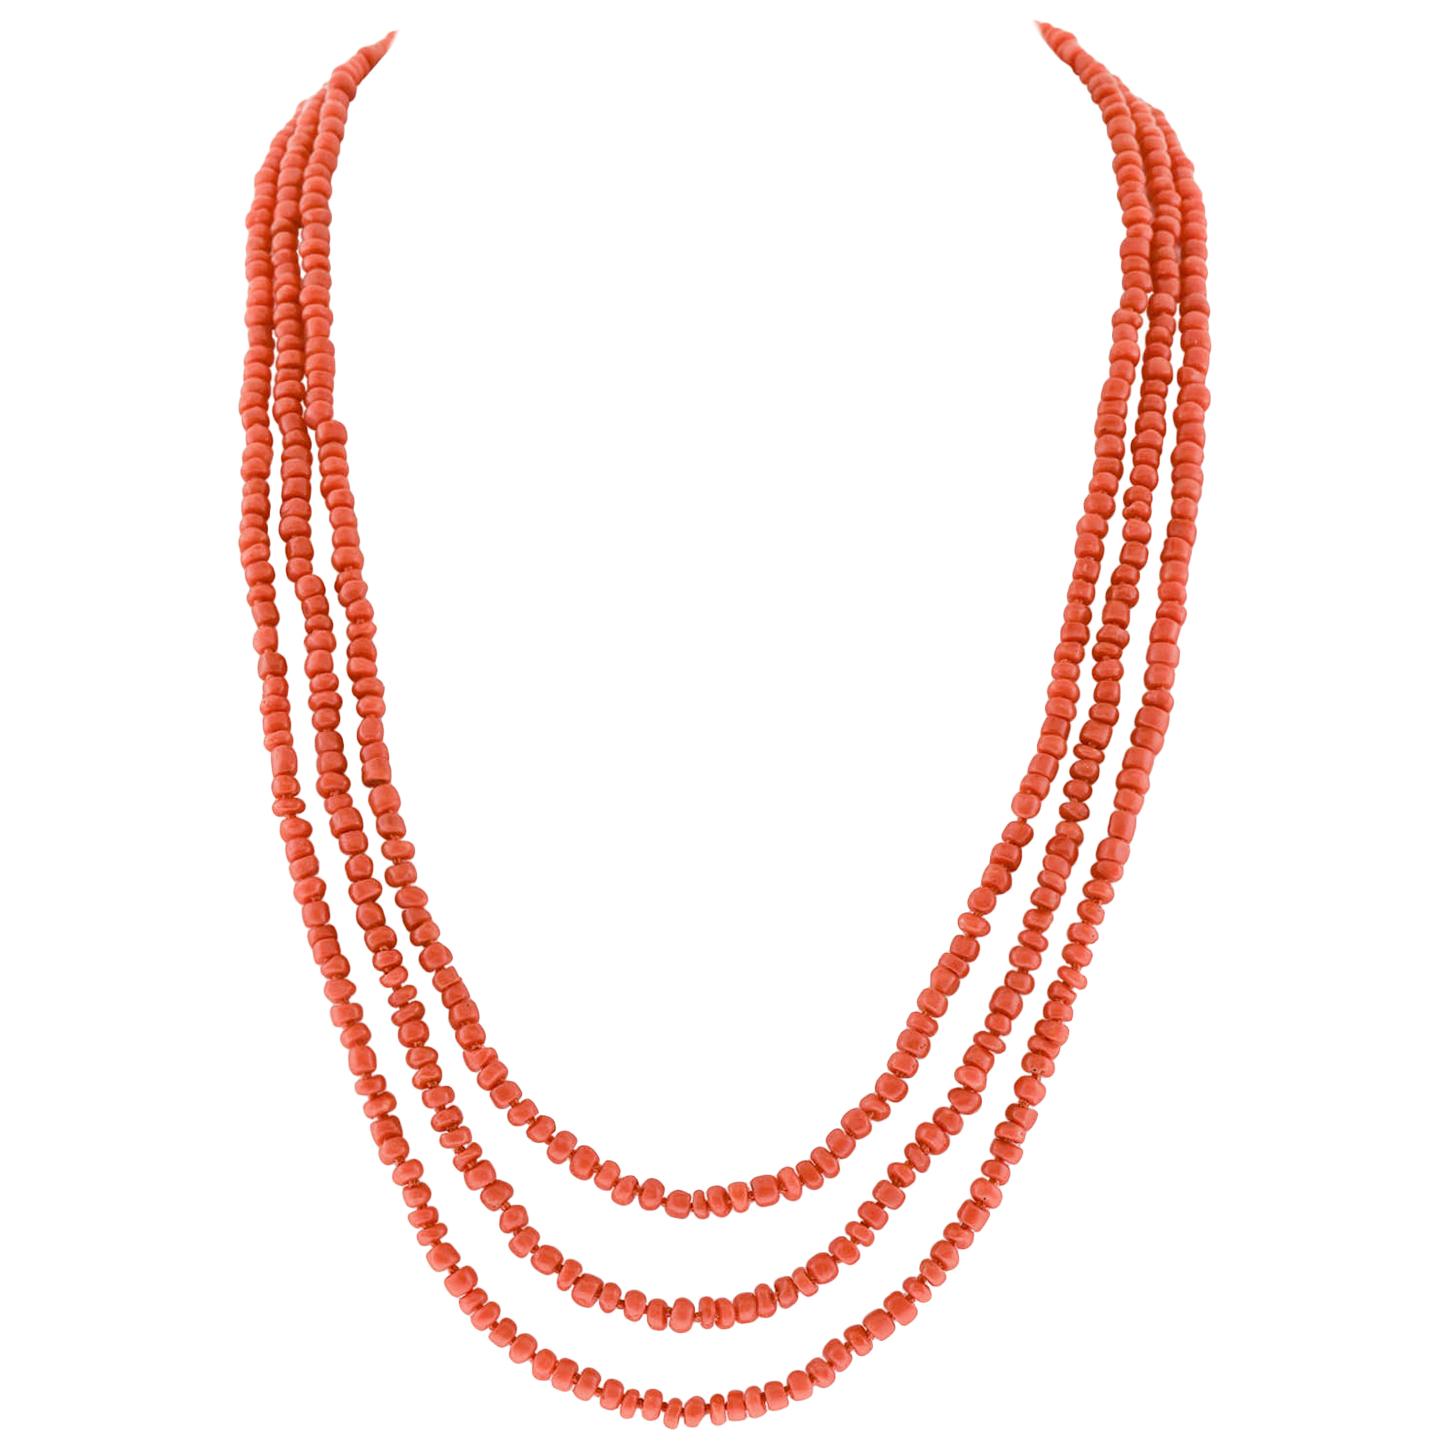 Fabulous Opera Length Coral Necklace